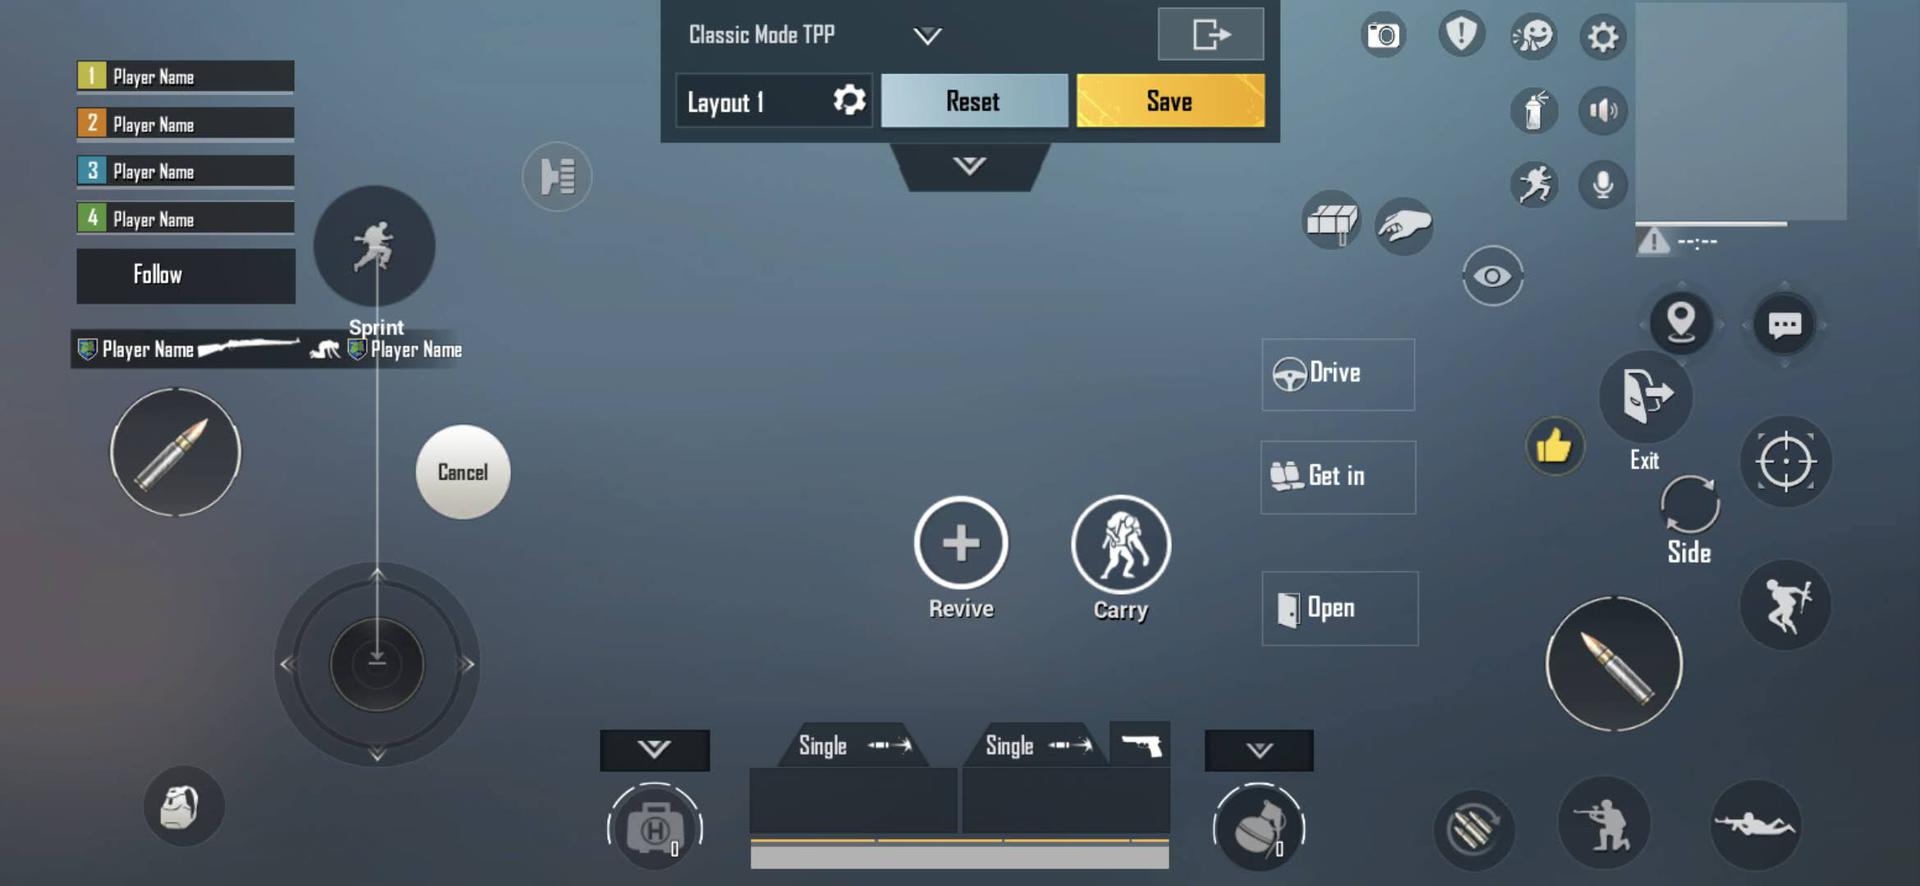 Customize buttons in PUBG Mobile 2